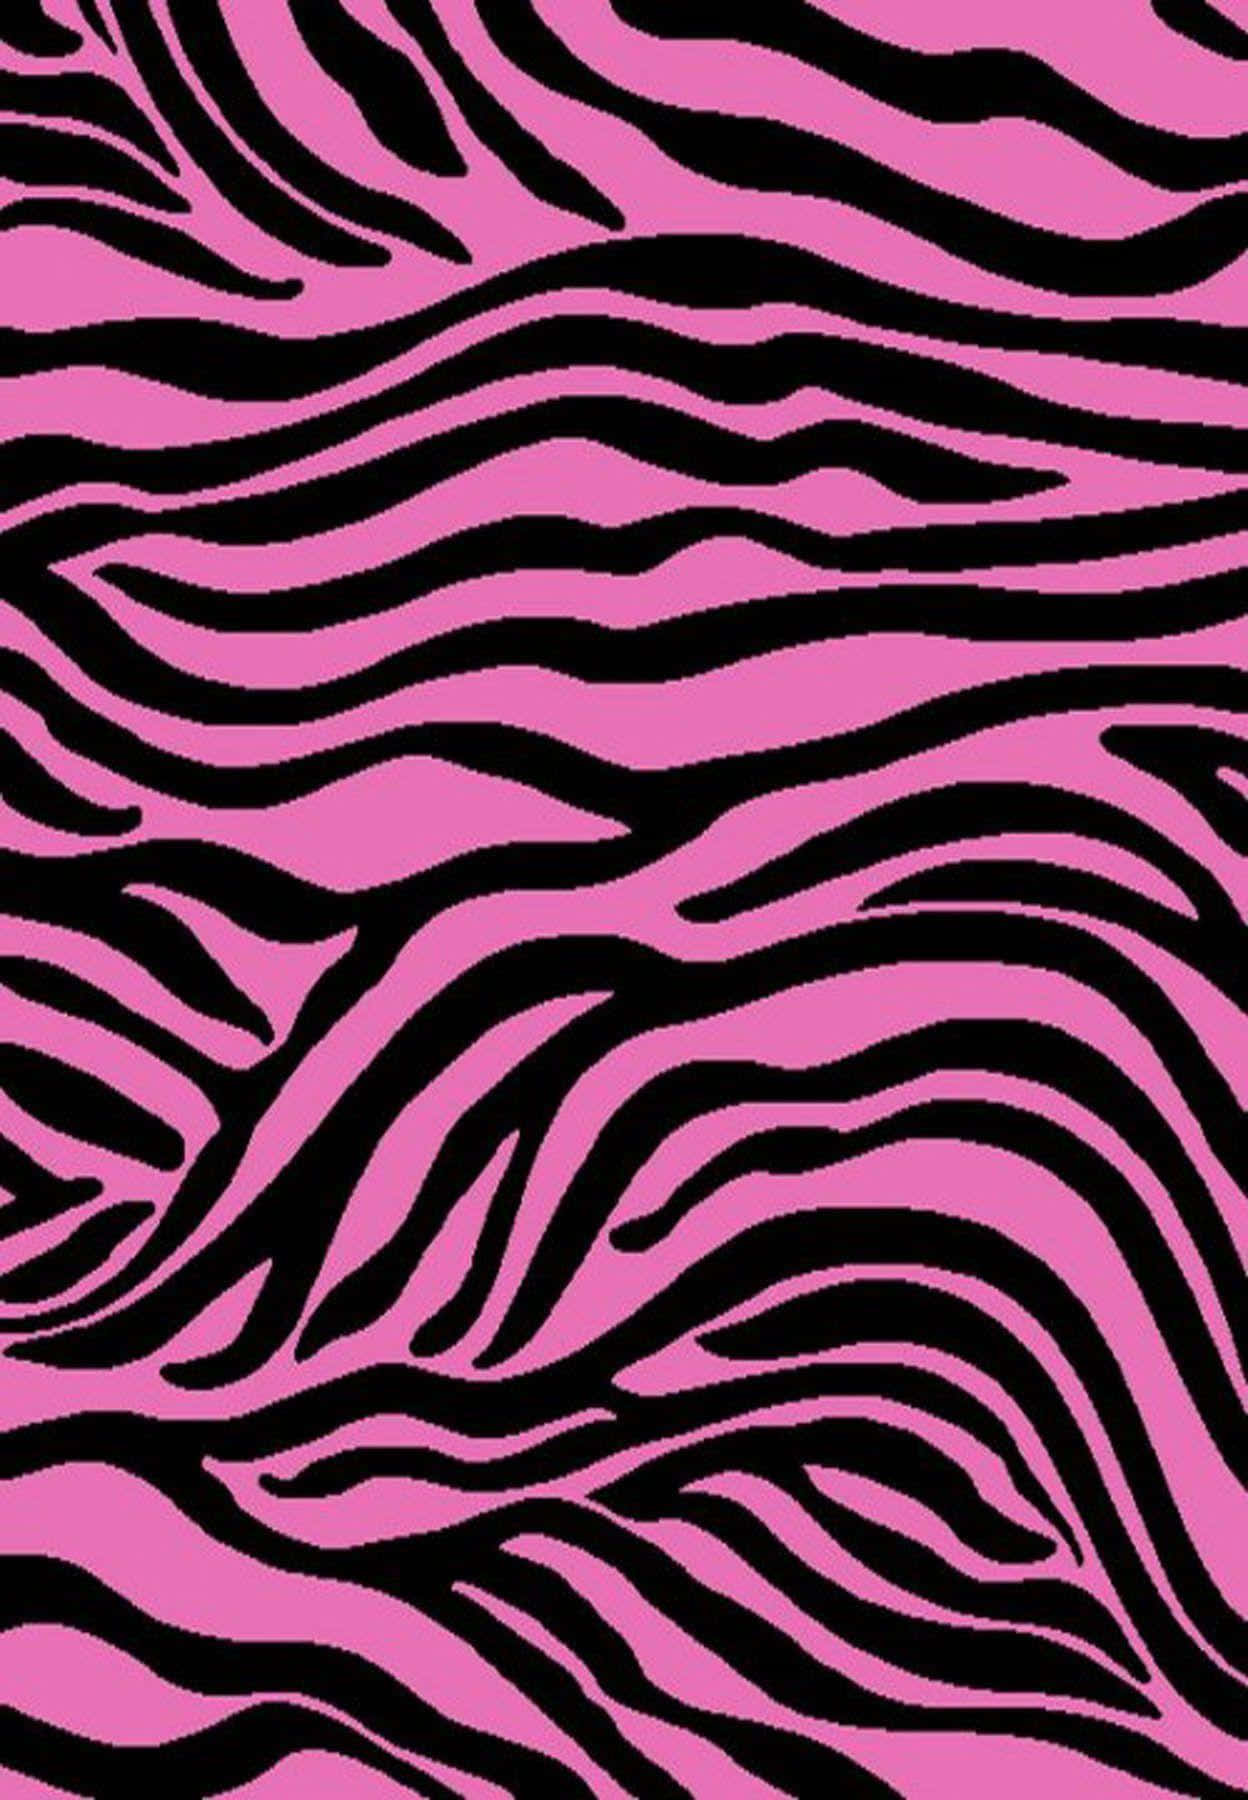 Wildly Colorful - Pink Zebra Pattern Background